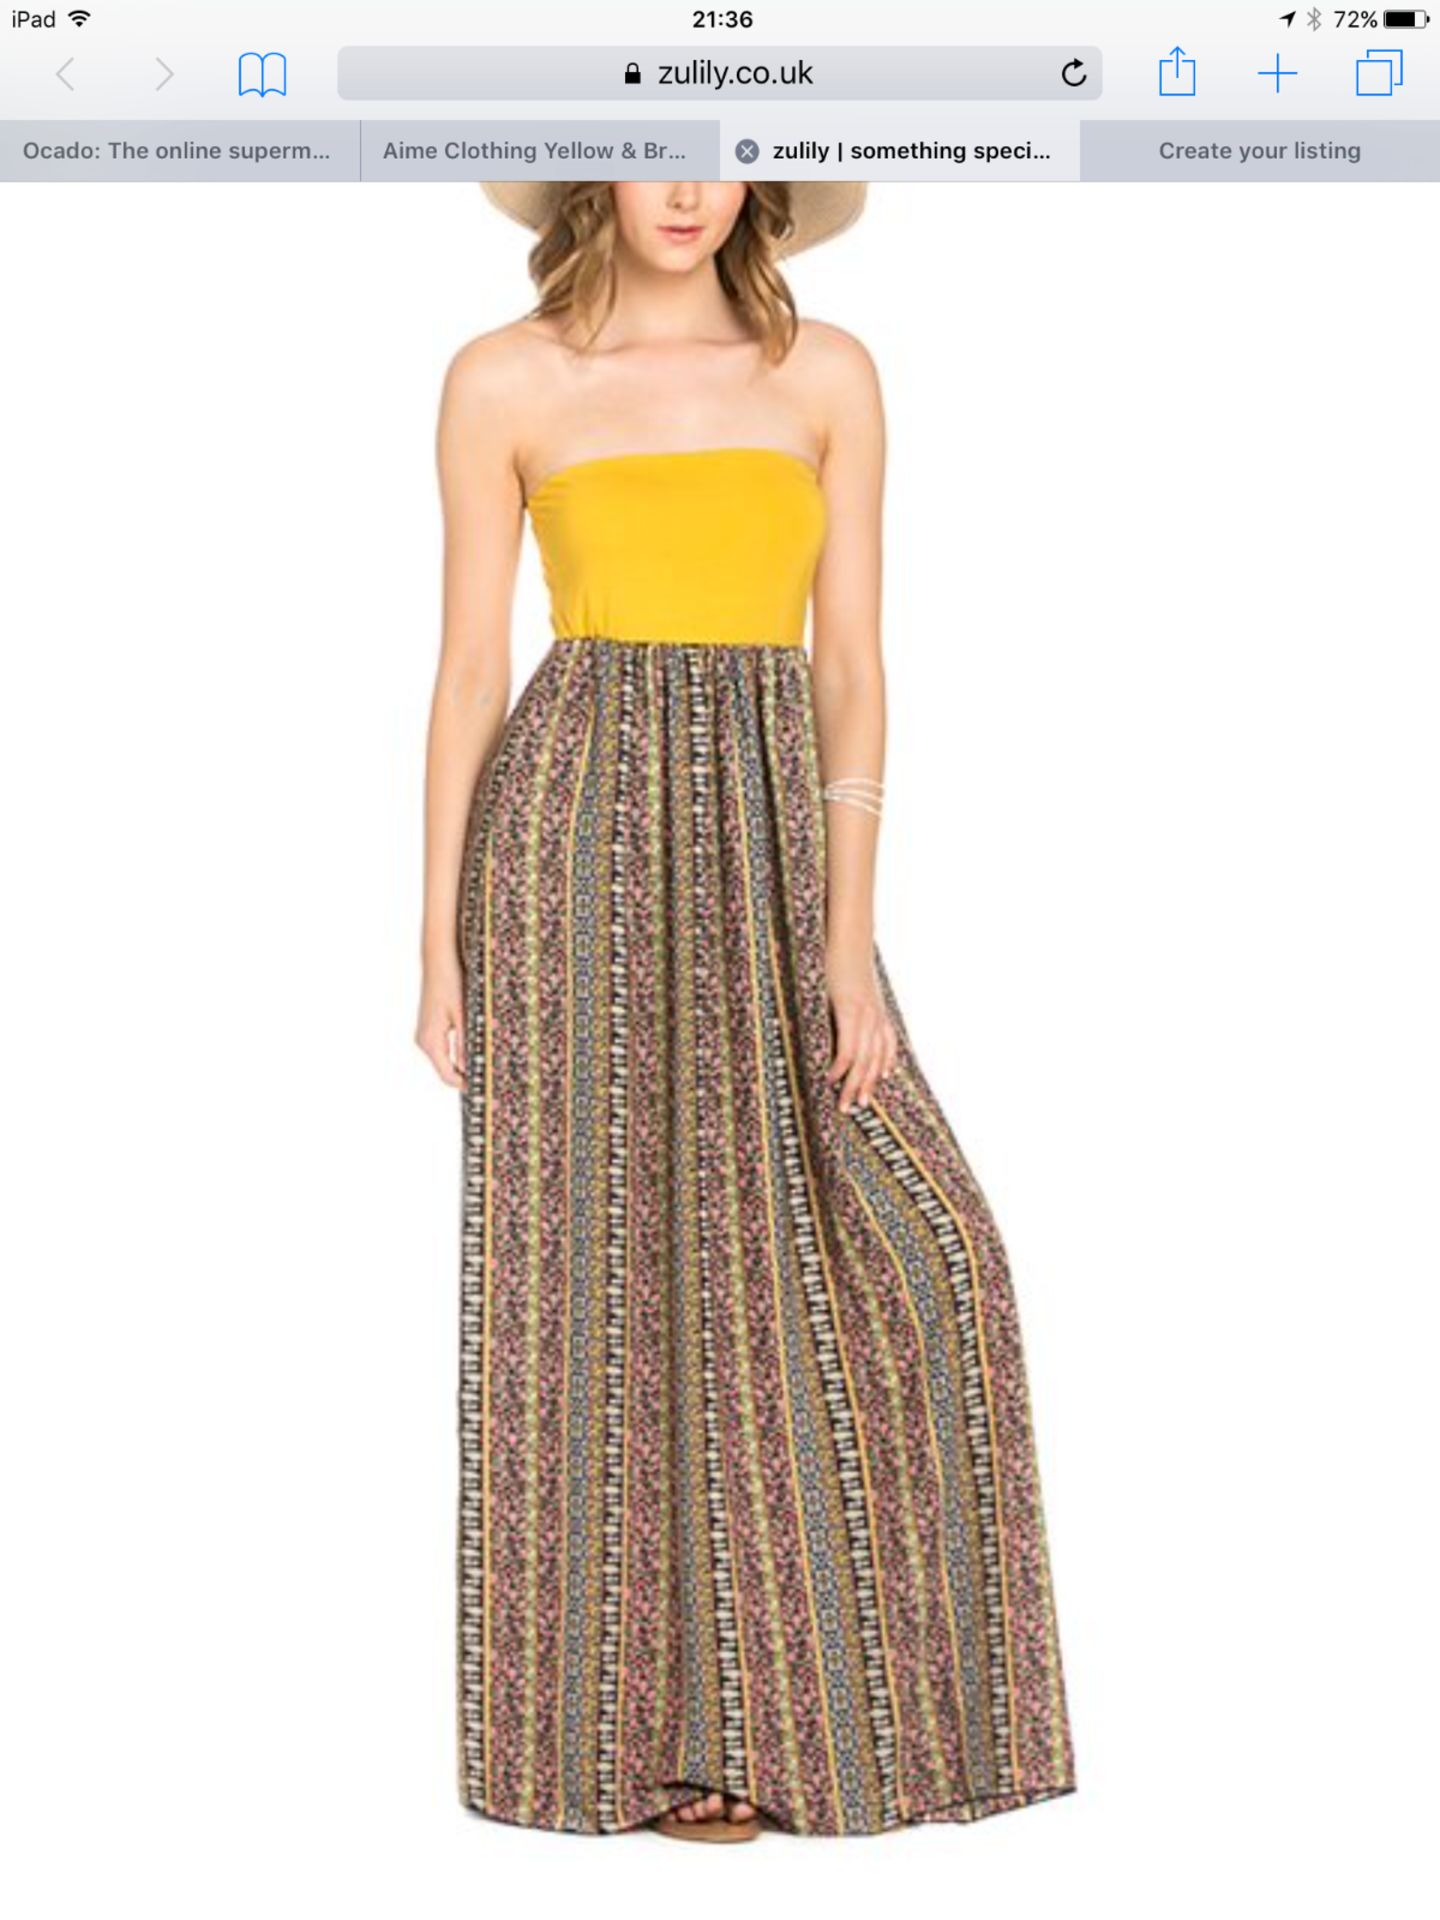 Aime Clothing Yellow & Brown Paisley Strapless Maxi Dress, Size Small (New with tags) [Ref: